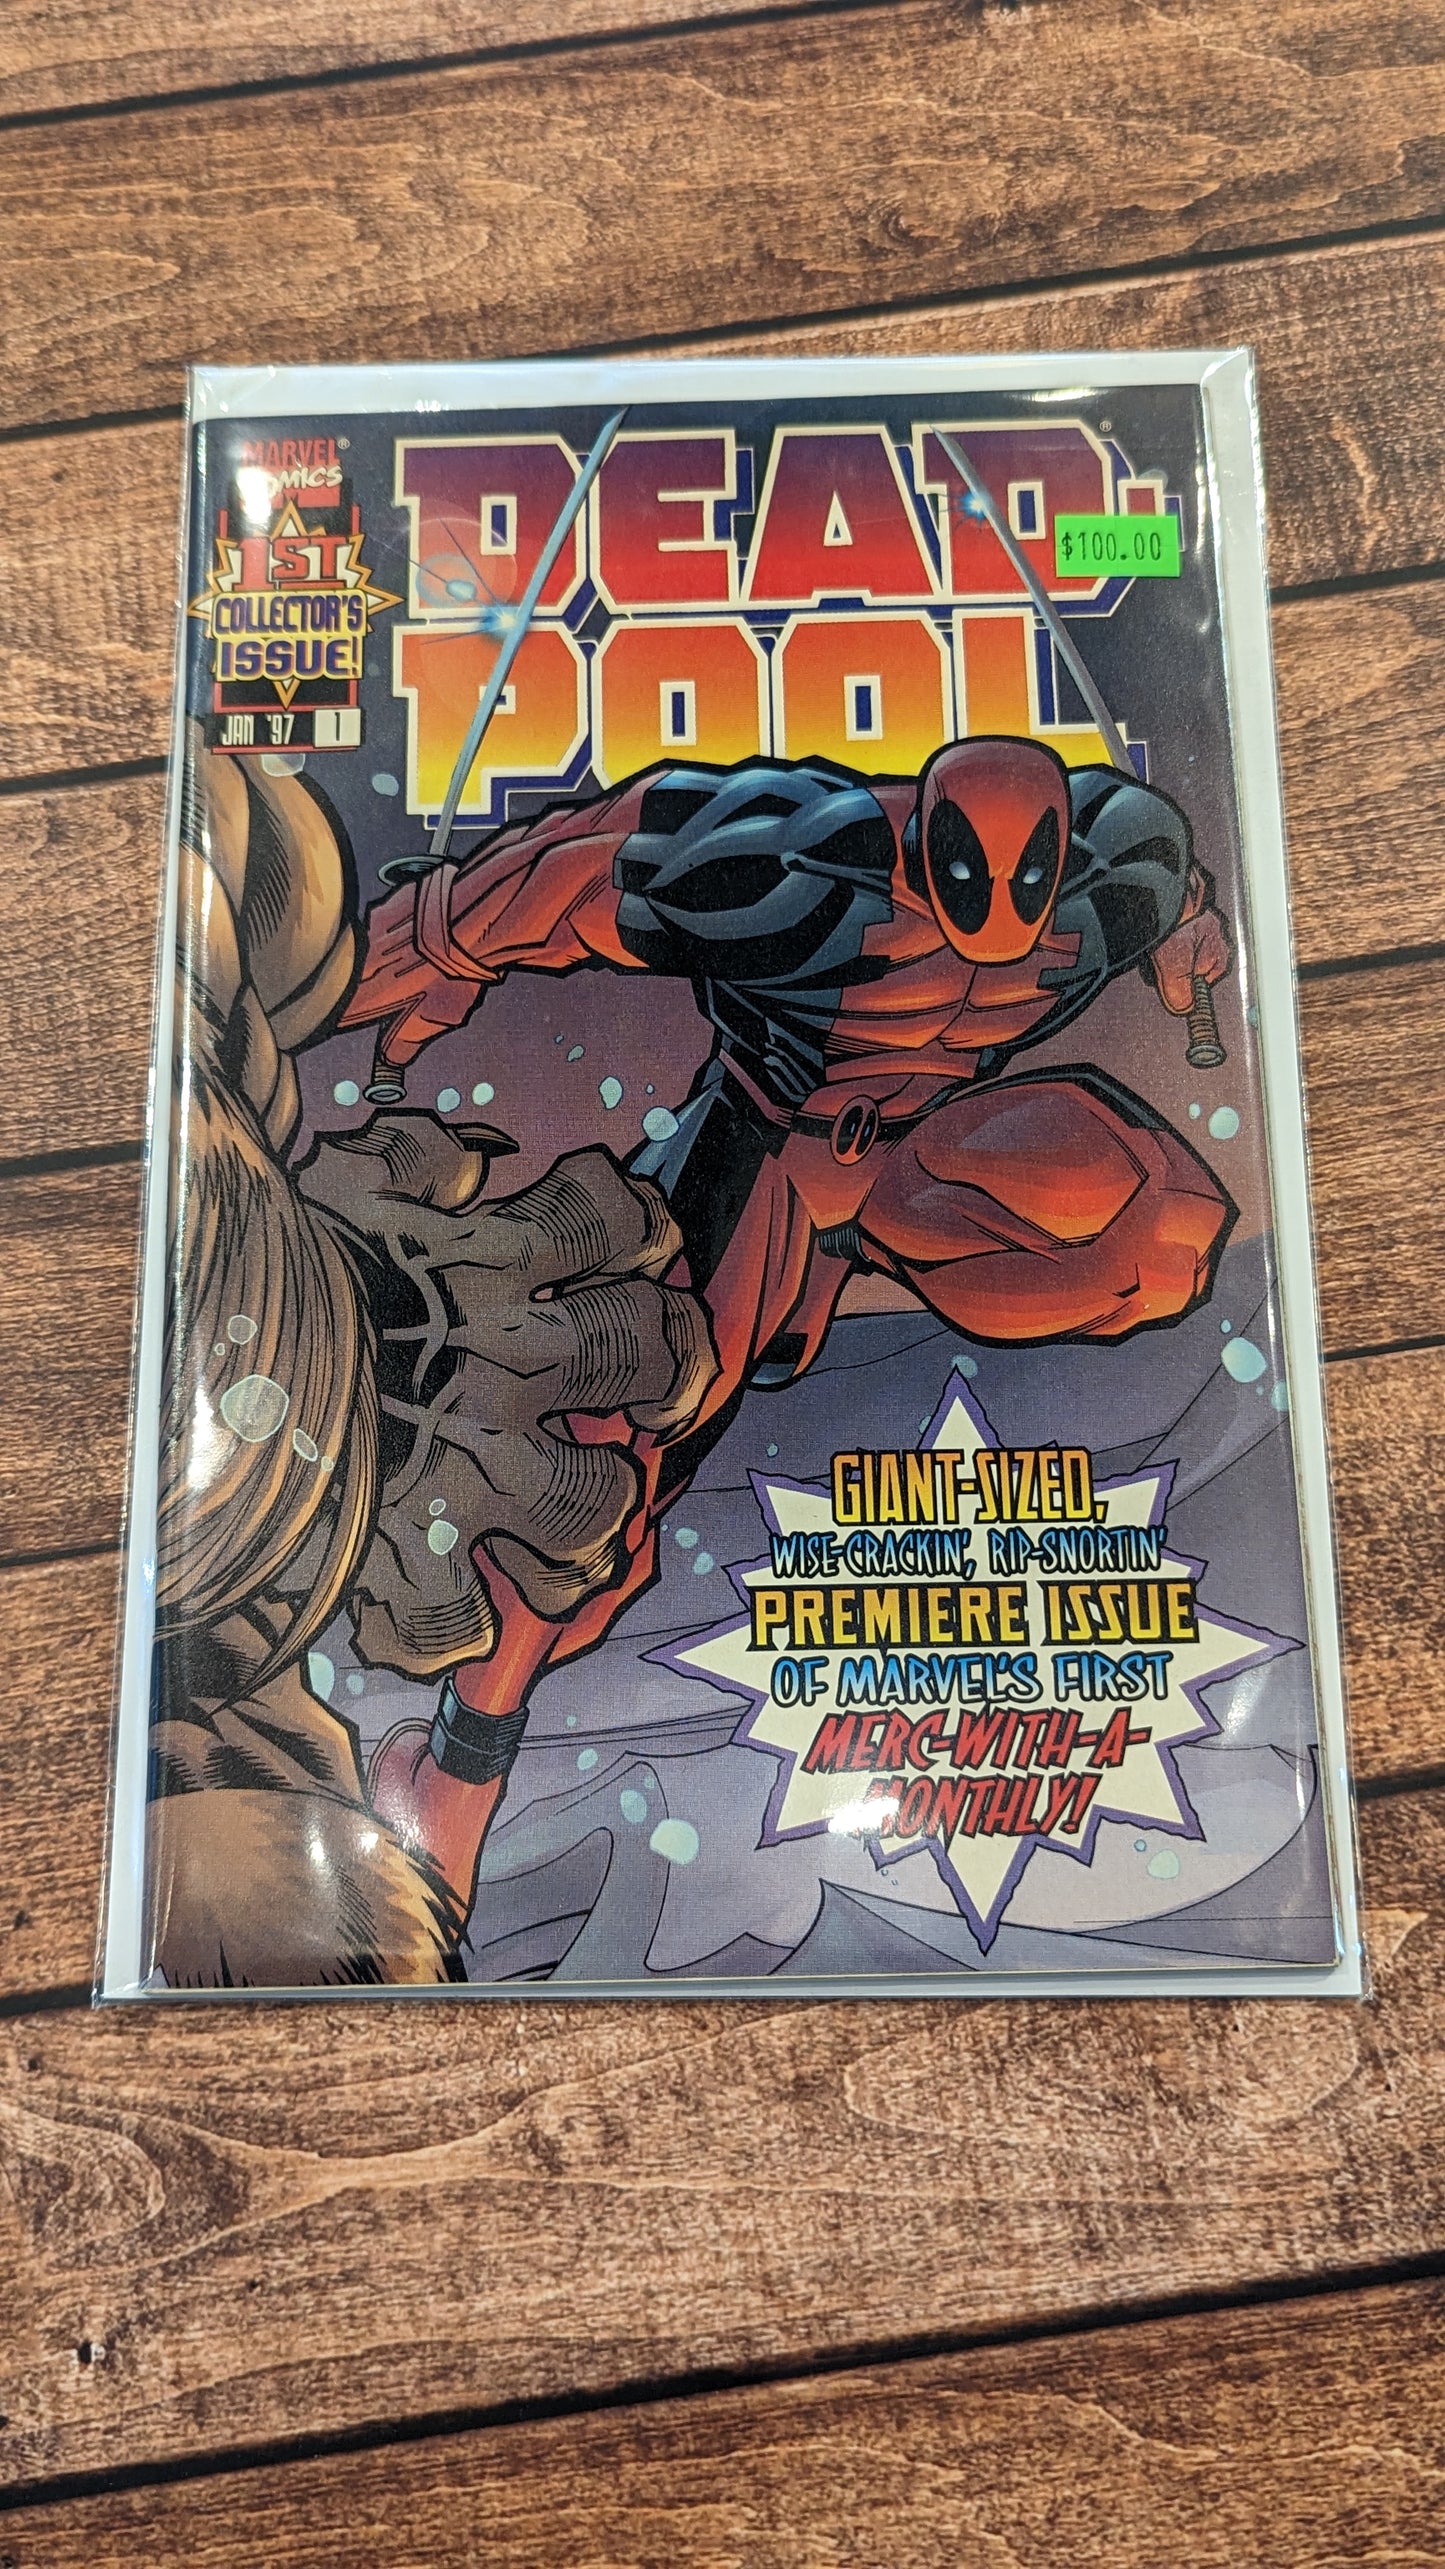 Dead Pool #1 - Marvel 1997 Collectors Issue